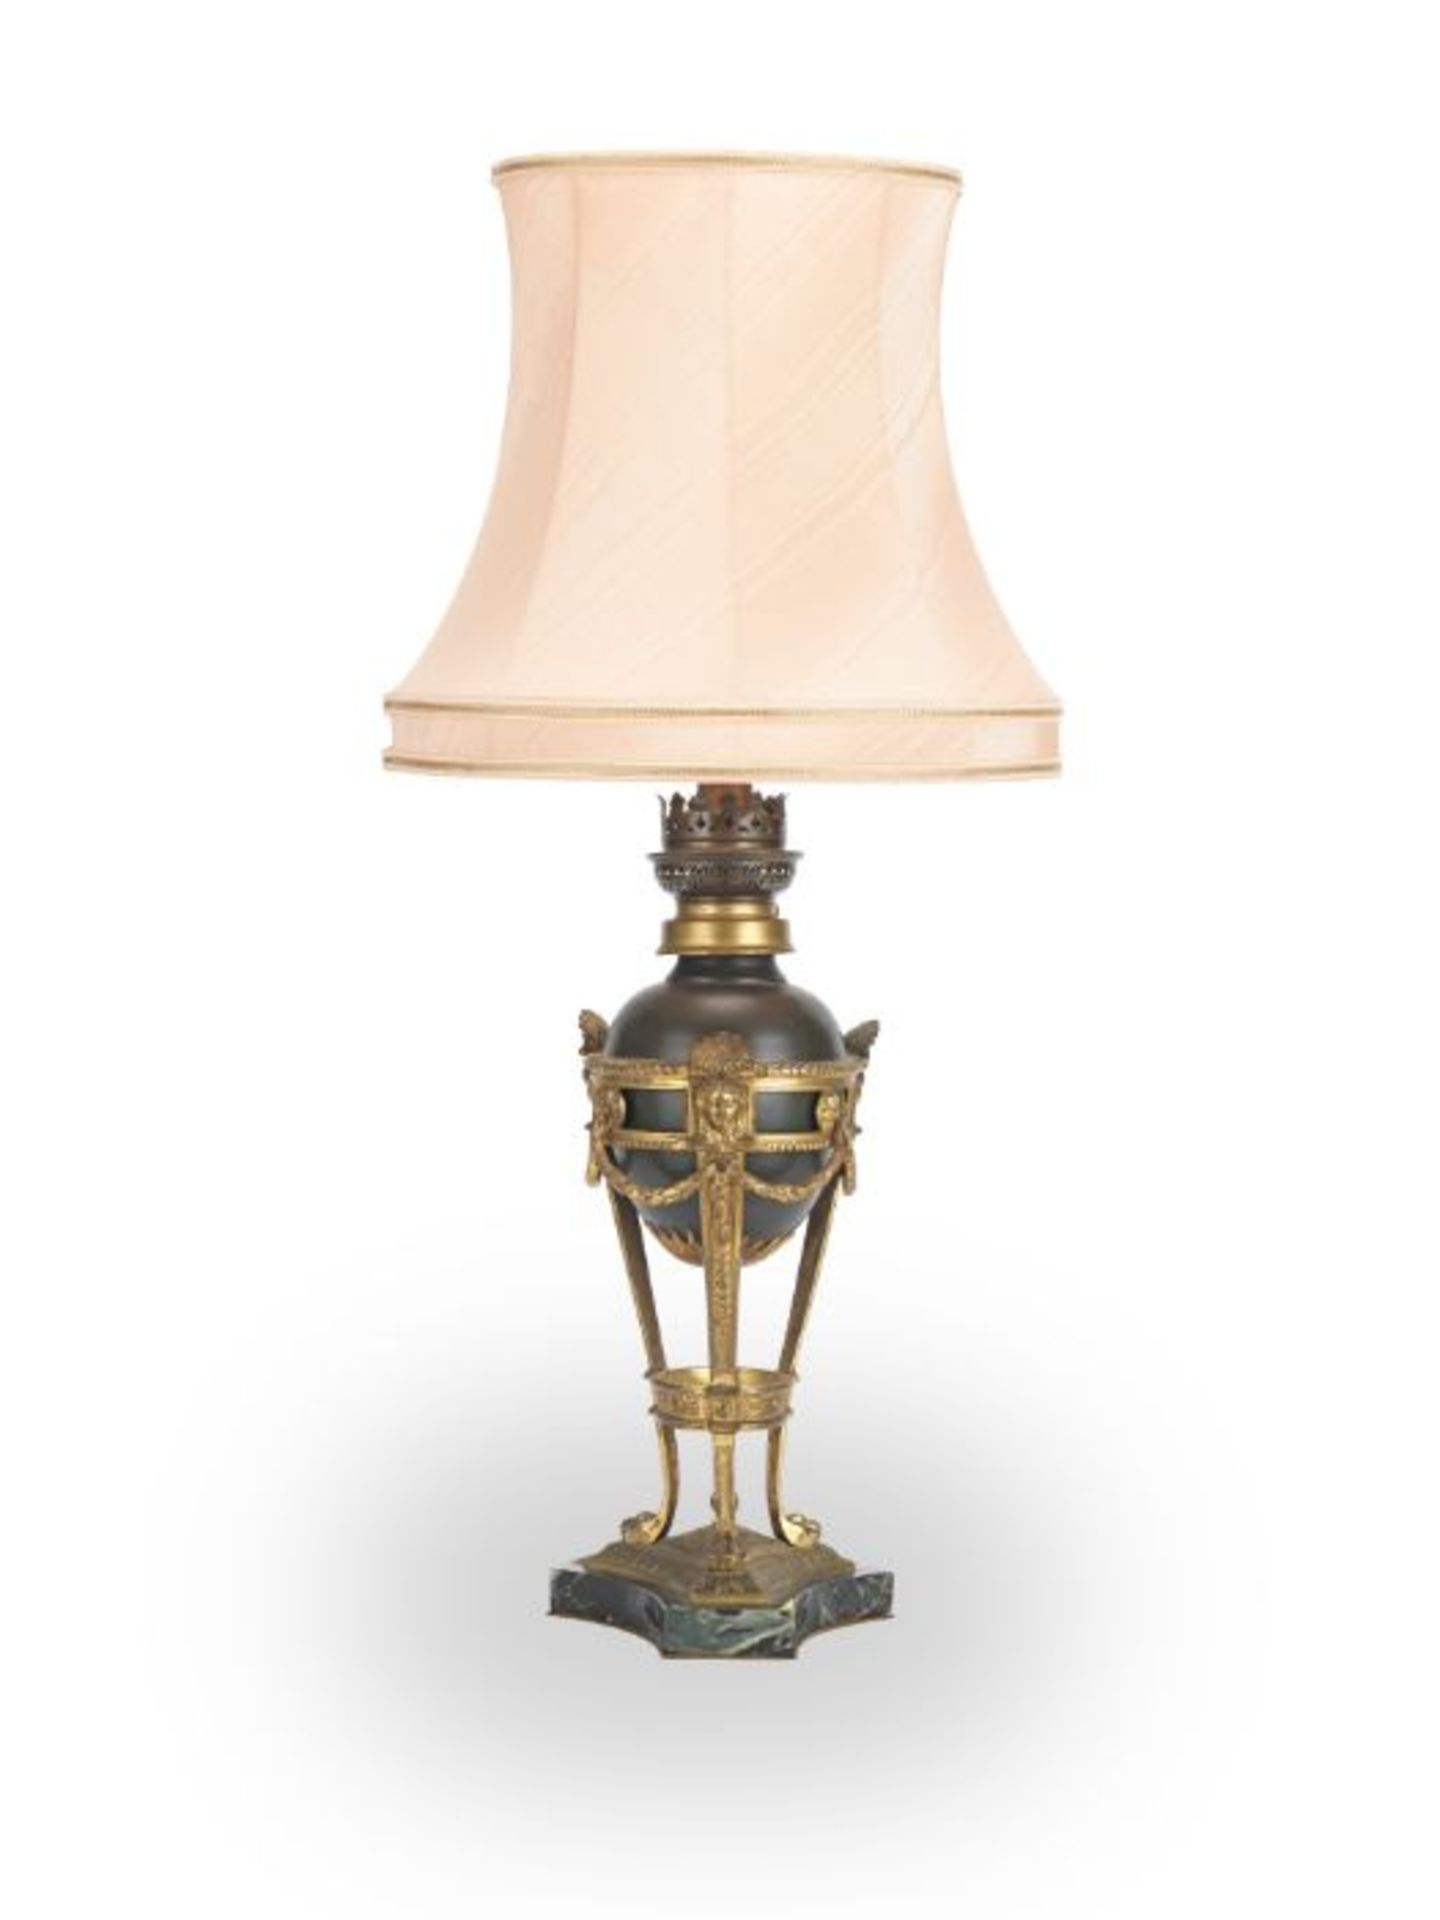 A 19th century patinated bronze and gilt bronze mounted table lamp, converted from an oil lamp - Image 8 of 10